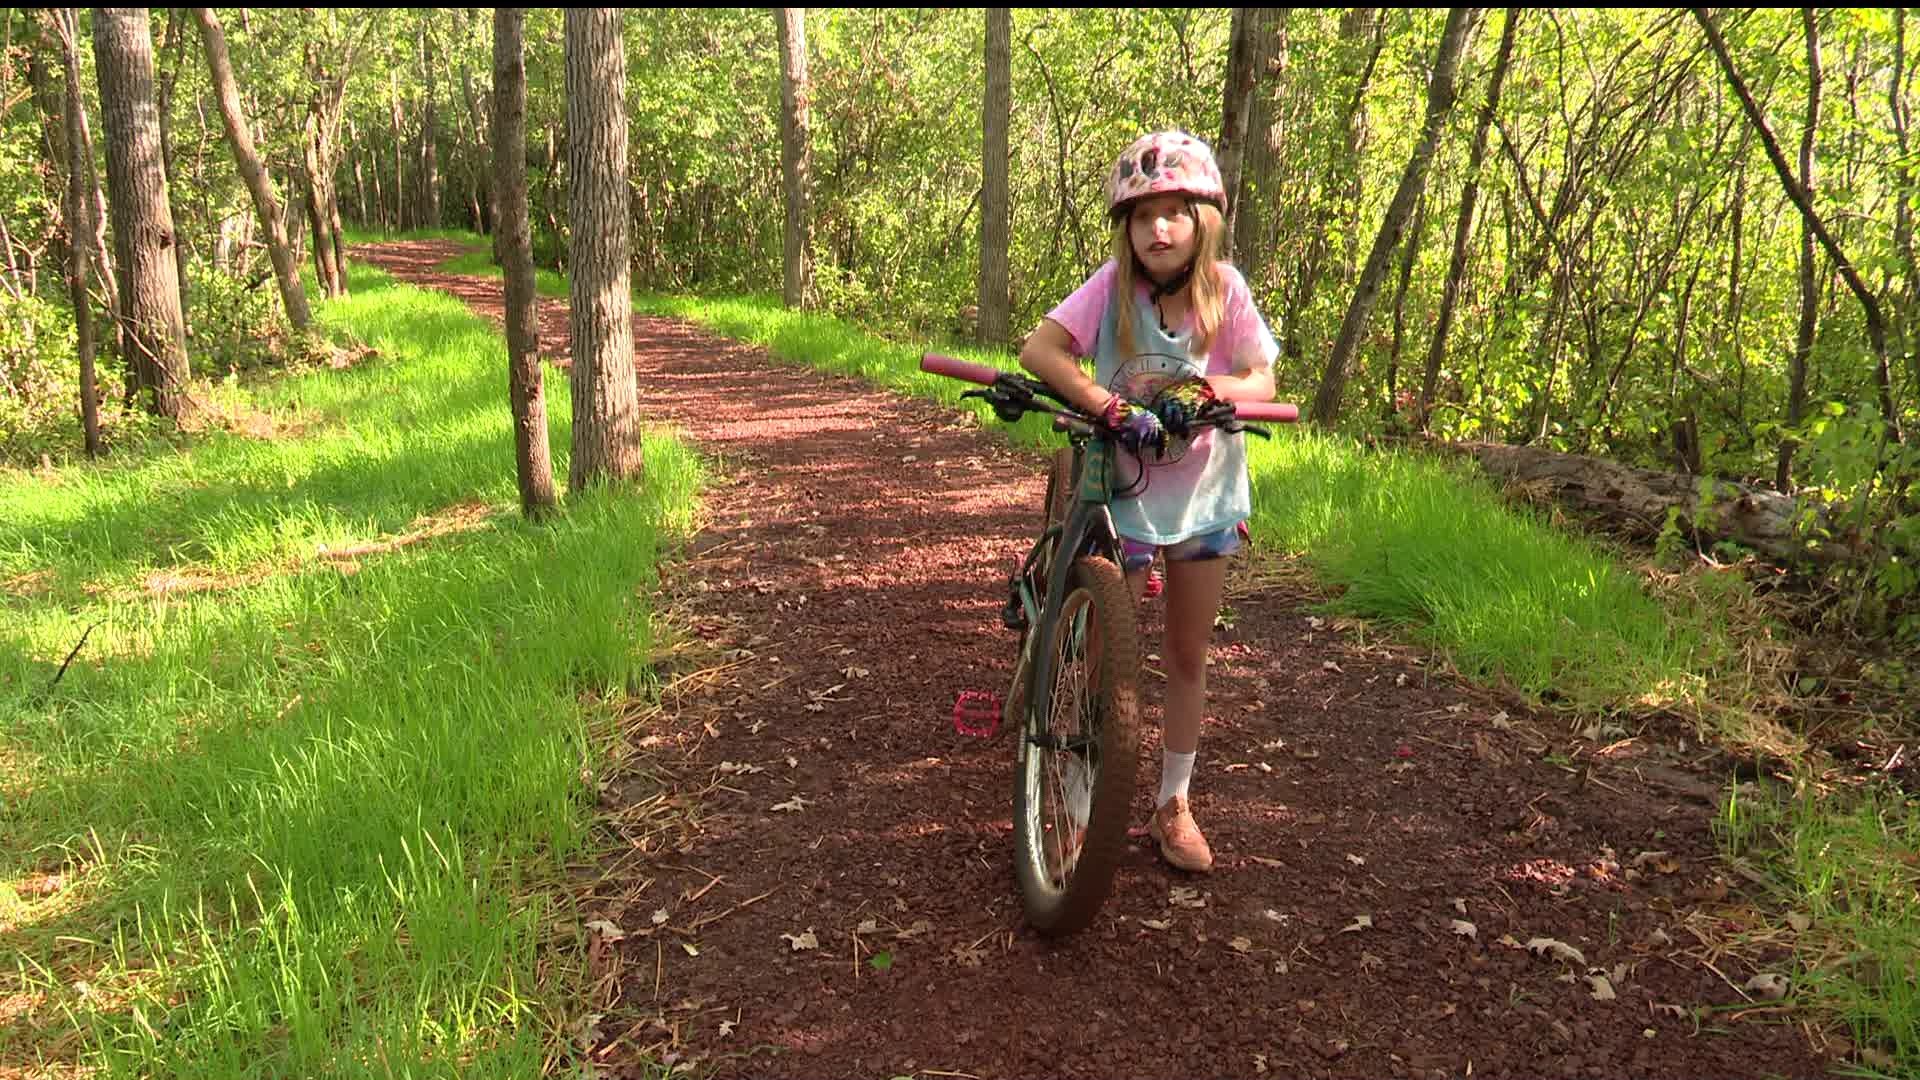 Fifth-grade teacher Lori Vosacek said many of her students haven't experienced the mountain biking trails in their hometown, but that's starting to change.